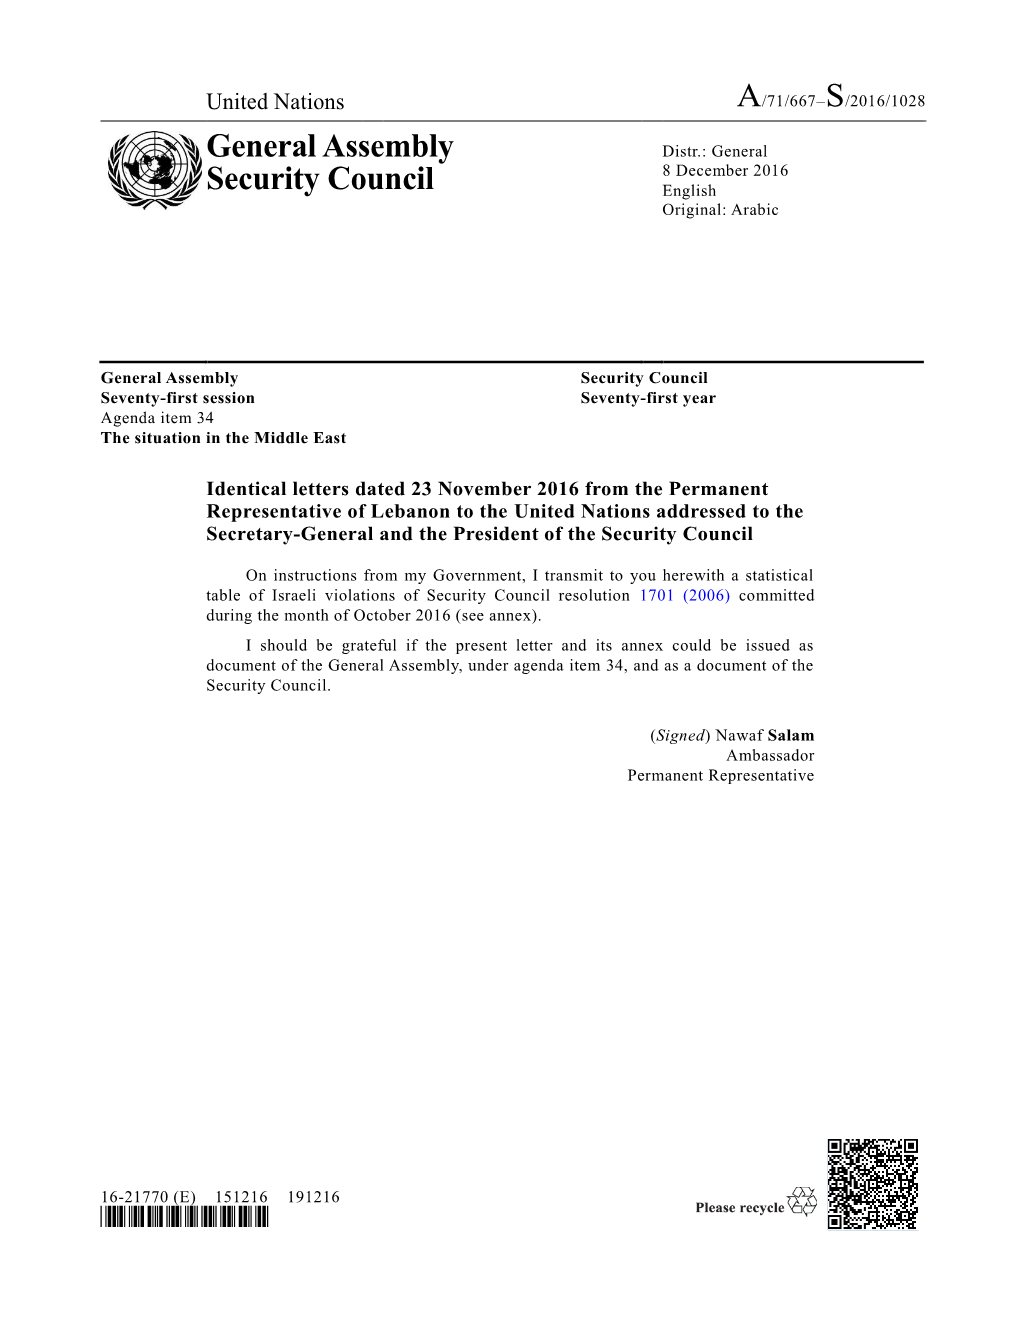 General Assembly Security Council Seventy-First Session Seventy-First Year Agenda Item 34 the Situation in the Middle East